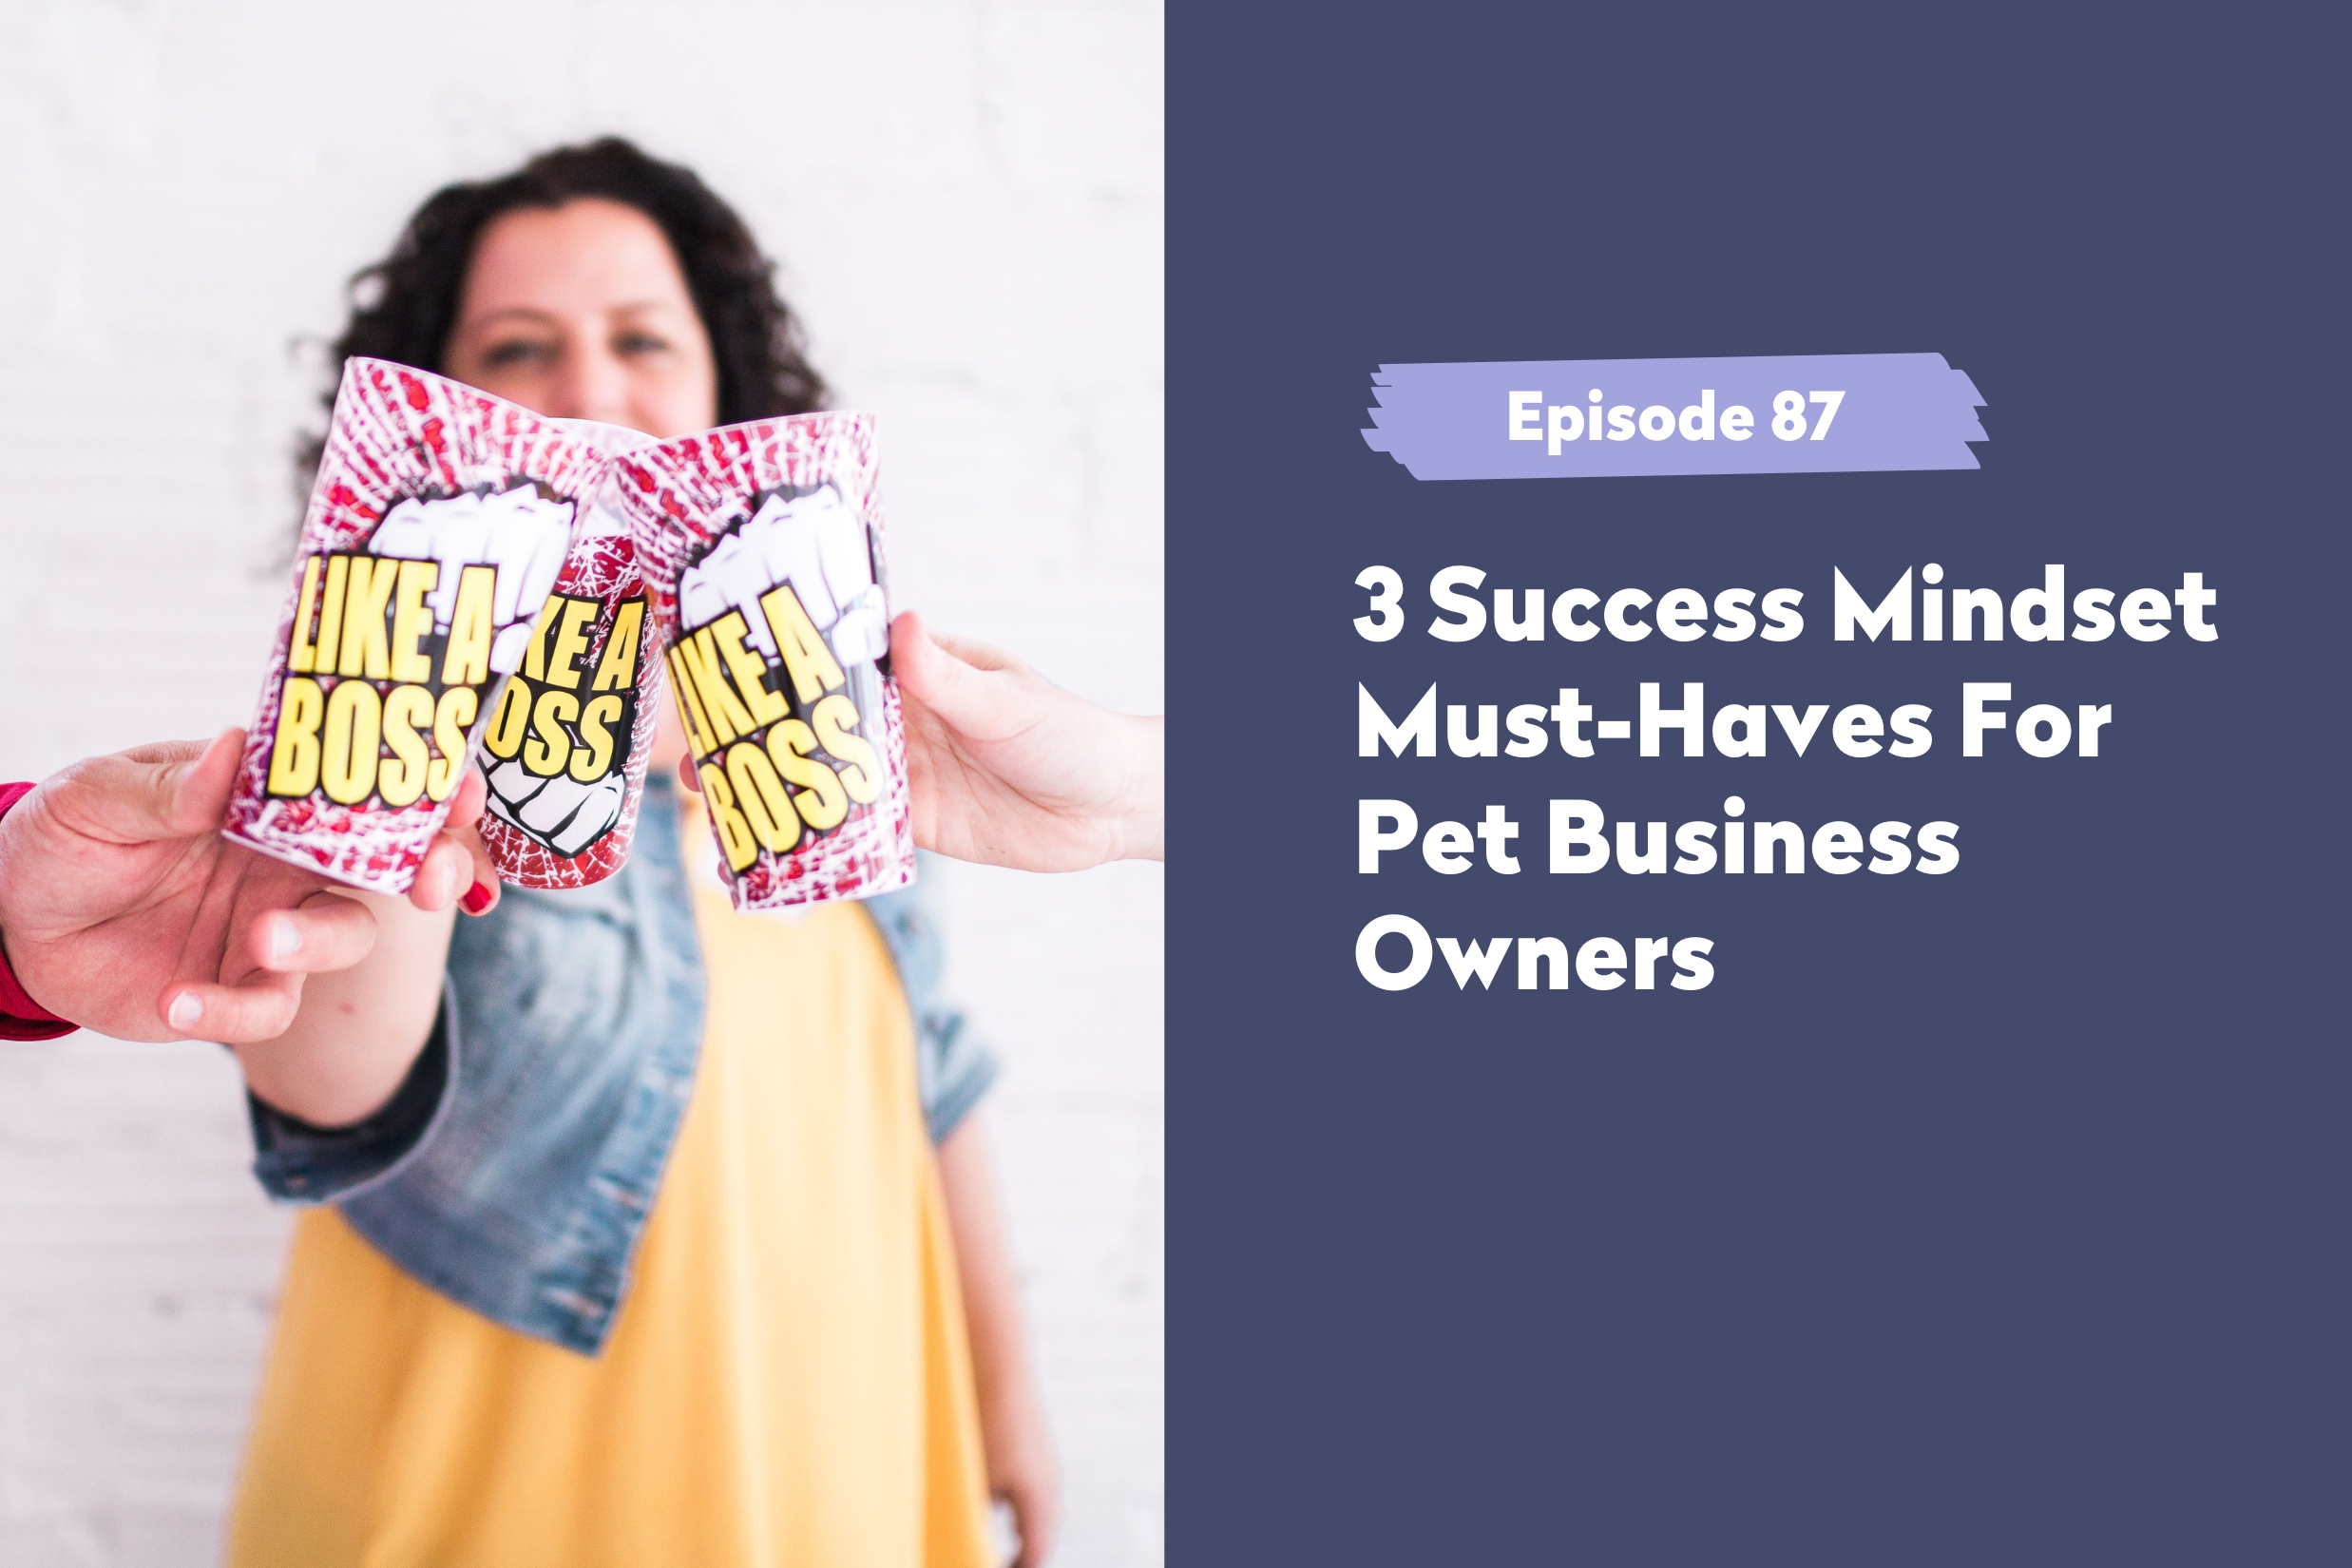 3 Success Mindset Must-Haves For Pet Business Owners 